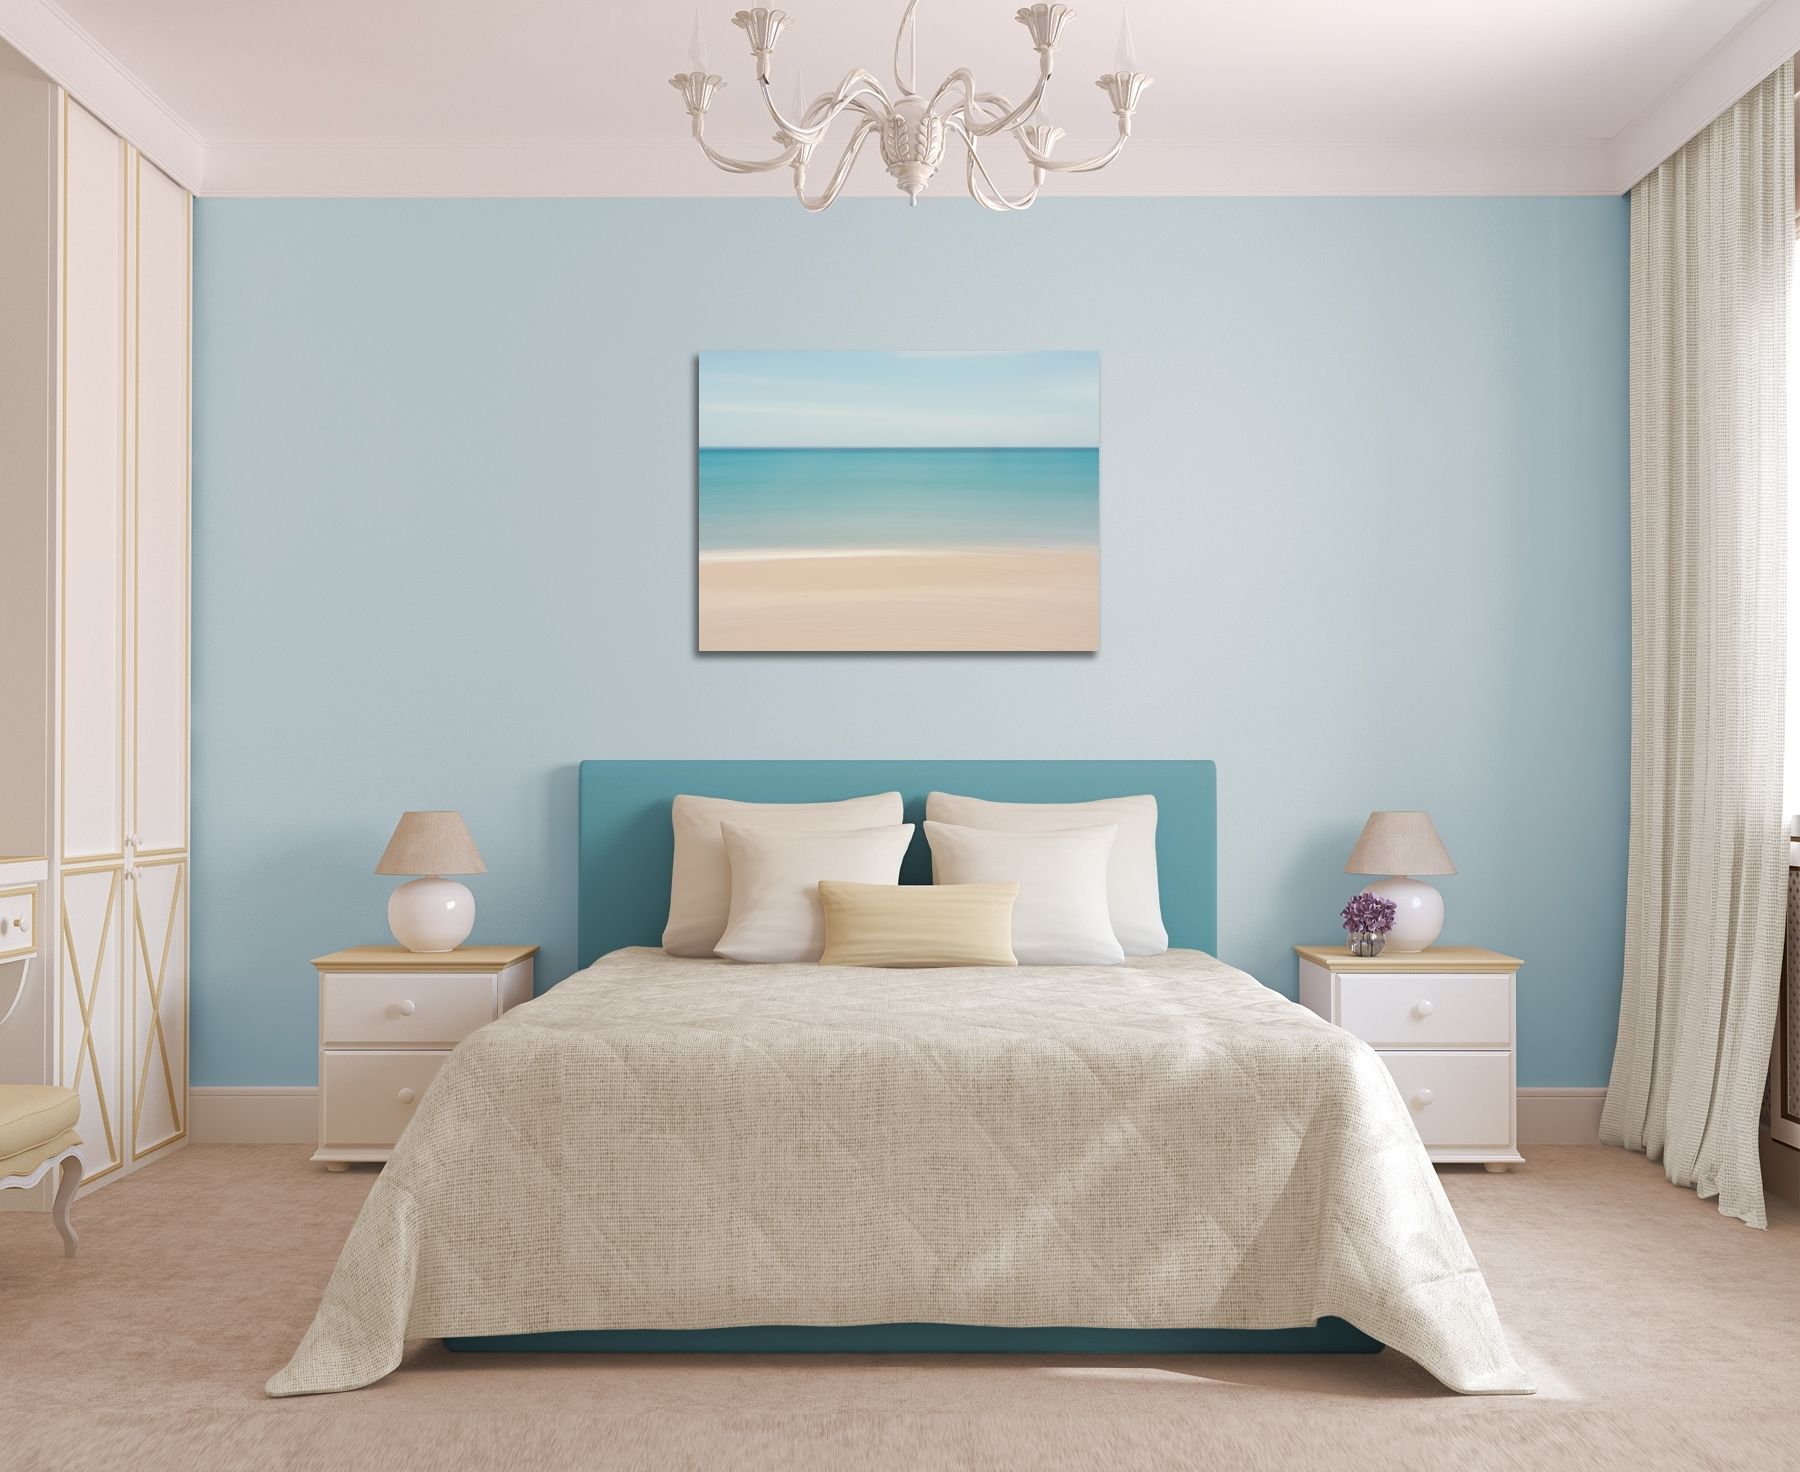 Most Recent Beach Decor, Canvas Gallery Wrap, Abstract Ocean Photo, Large Wall With Abstract Beach Wall Art (View 10 of 15)